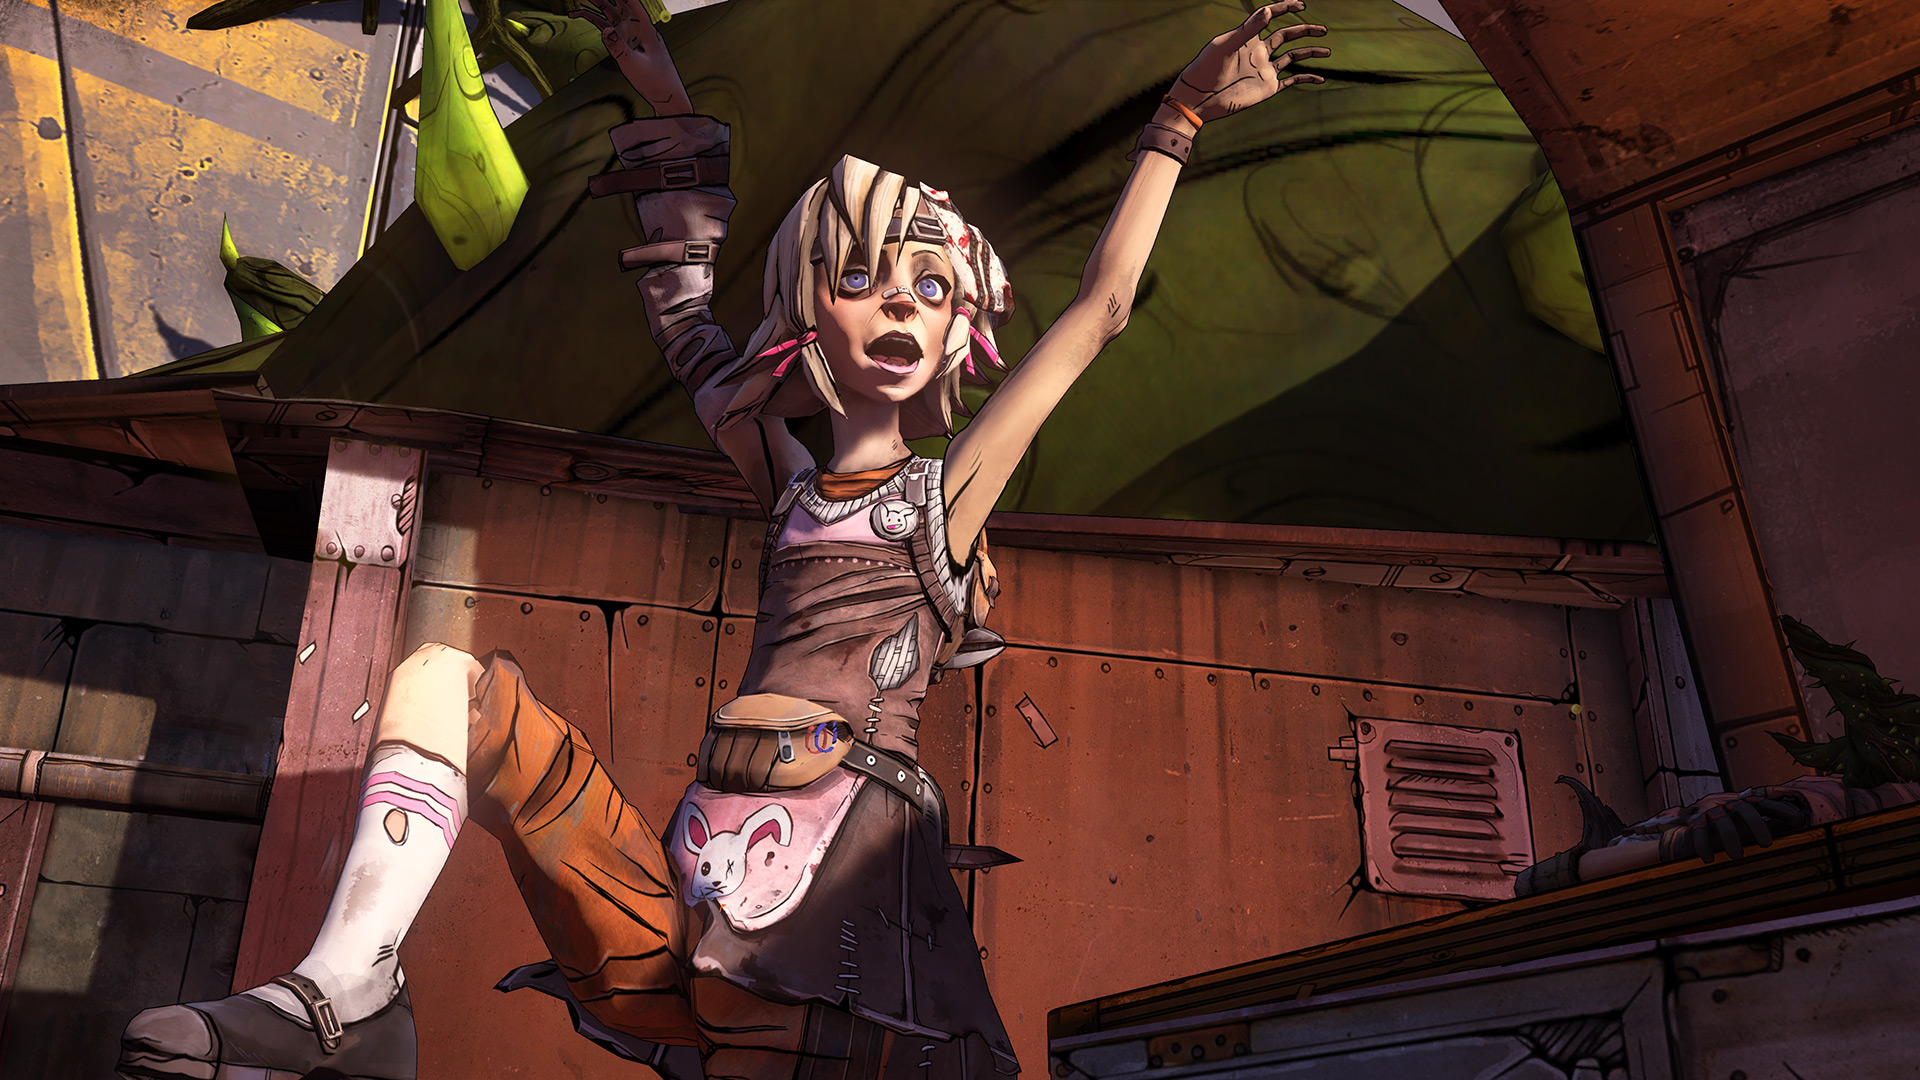 Borderlands 2: Commander Lilith & the Fight for Sanctuary on Steam